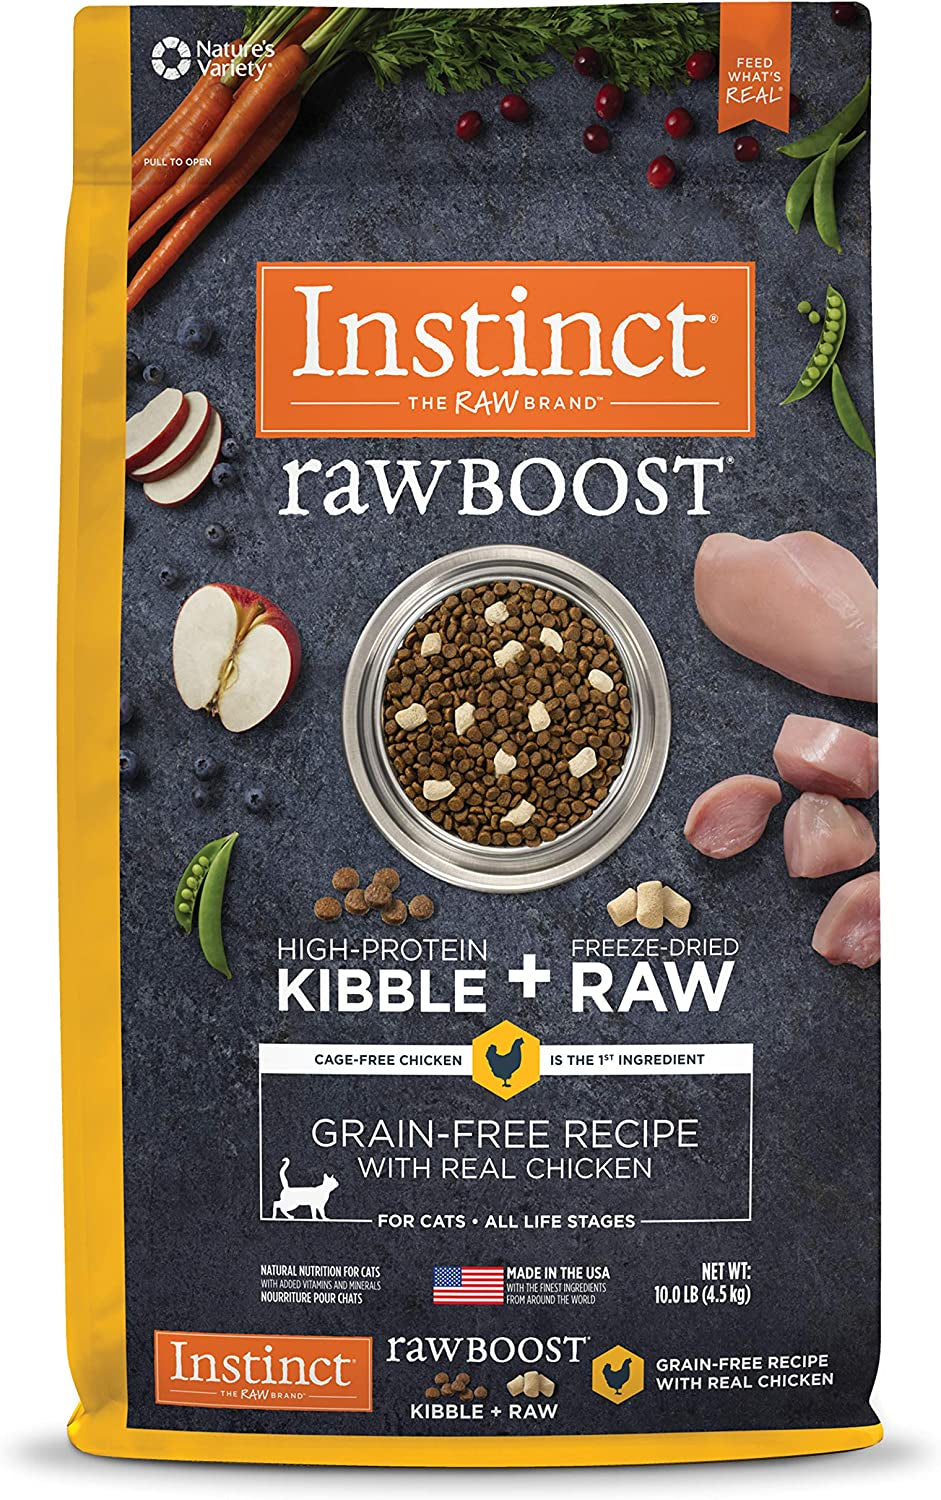 Instinct Raw Boost Grain Free Recipe with Real Chicken Natural Dry Cat Food, 10 Lb. Bag